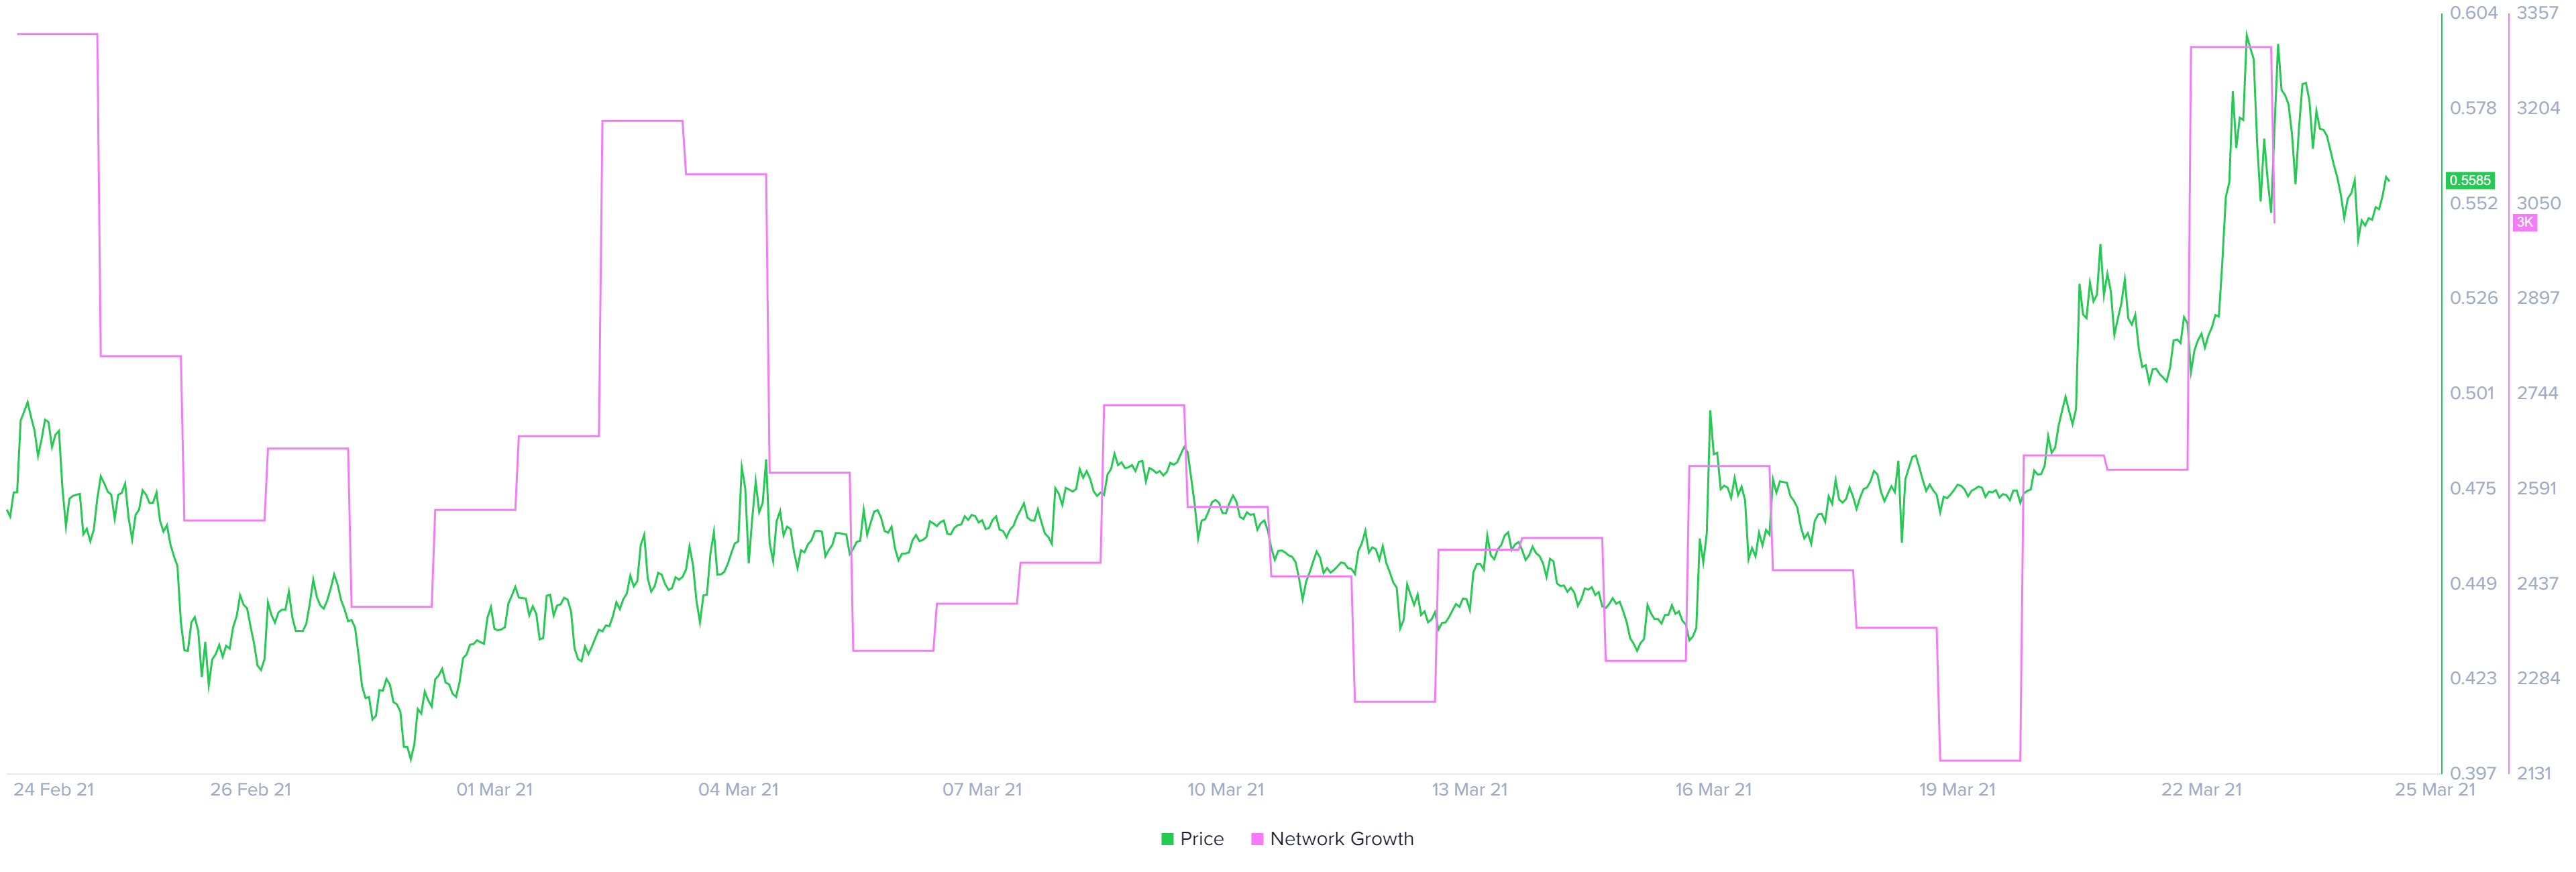 XRP/USD network growth chart